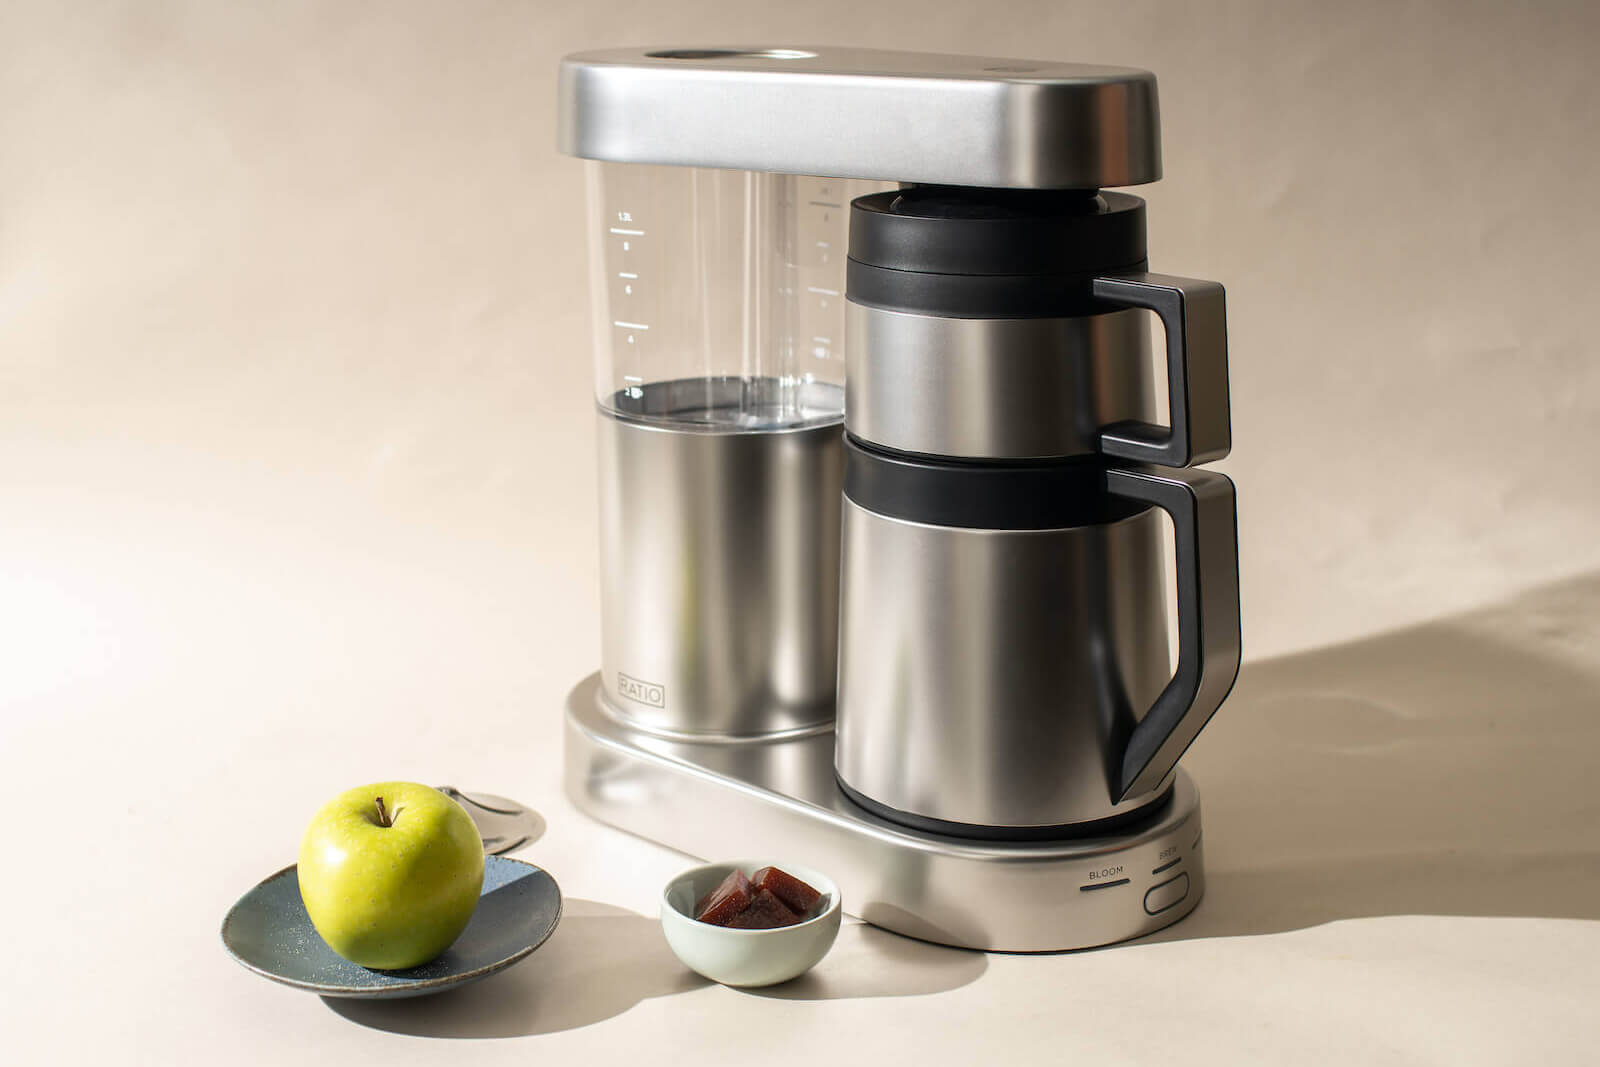 Ratio Six Coffee Maker Overview – Clive Coffee